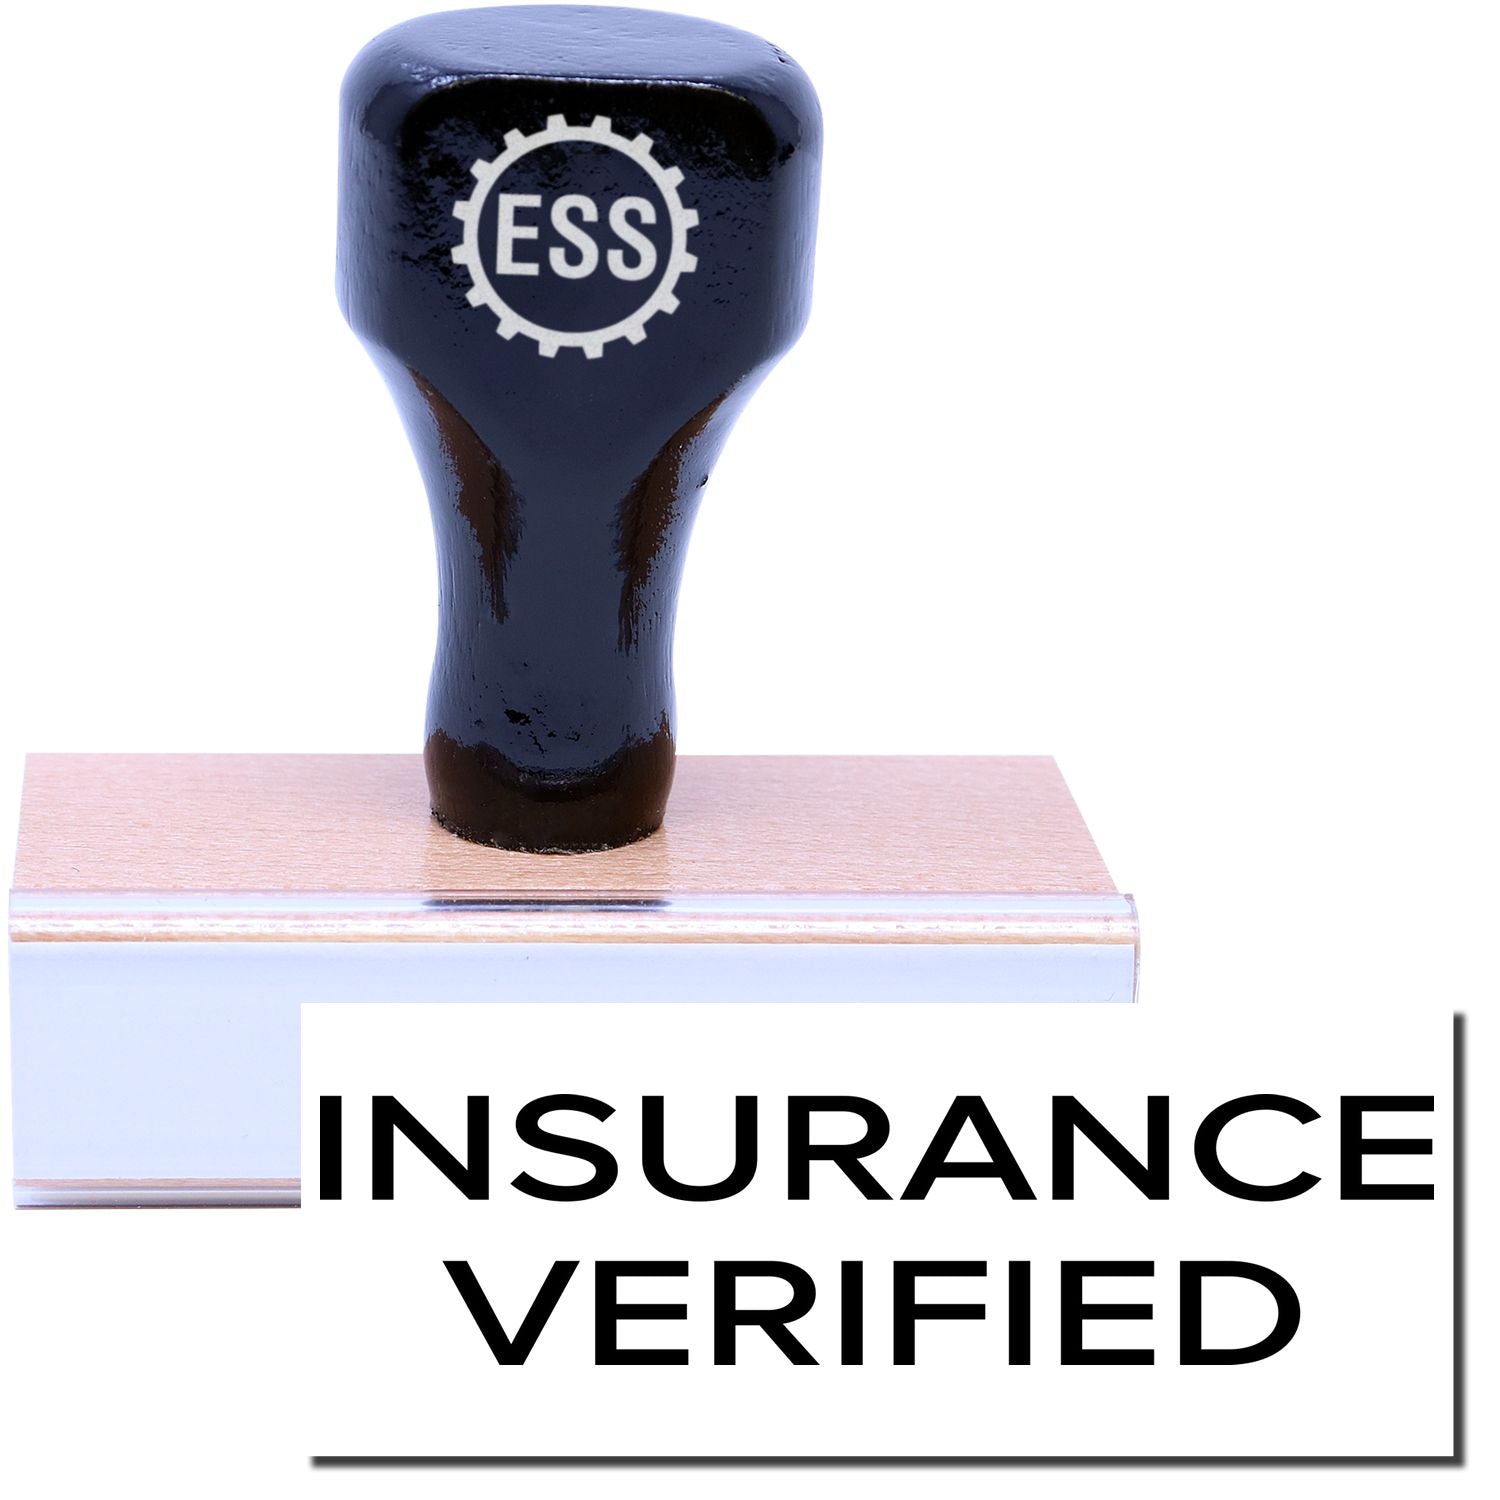 A stock office rubber stamp with a stamped image showing how the text "INSURANCE VERIFIED" in a narrow font is displayed after stamping.